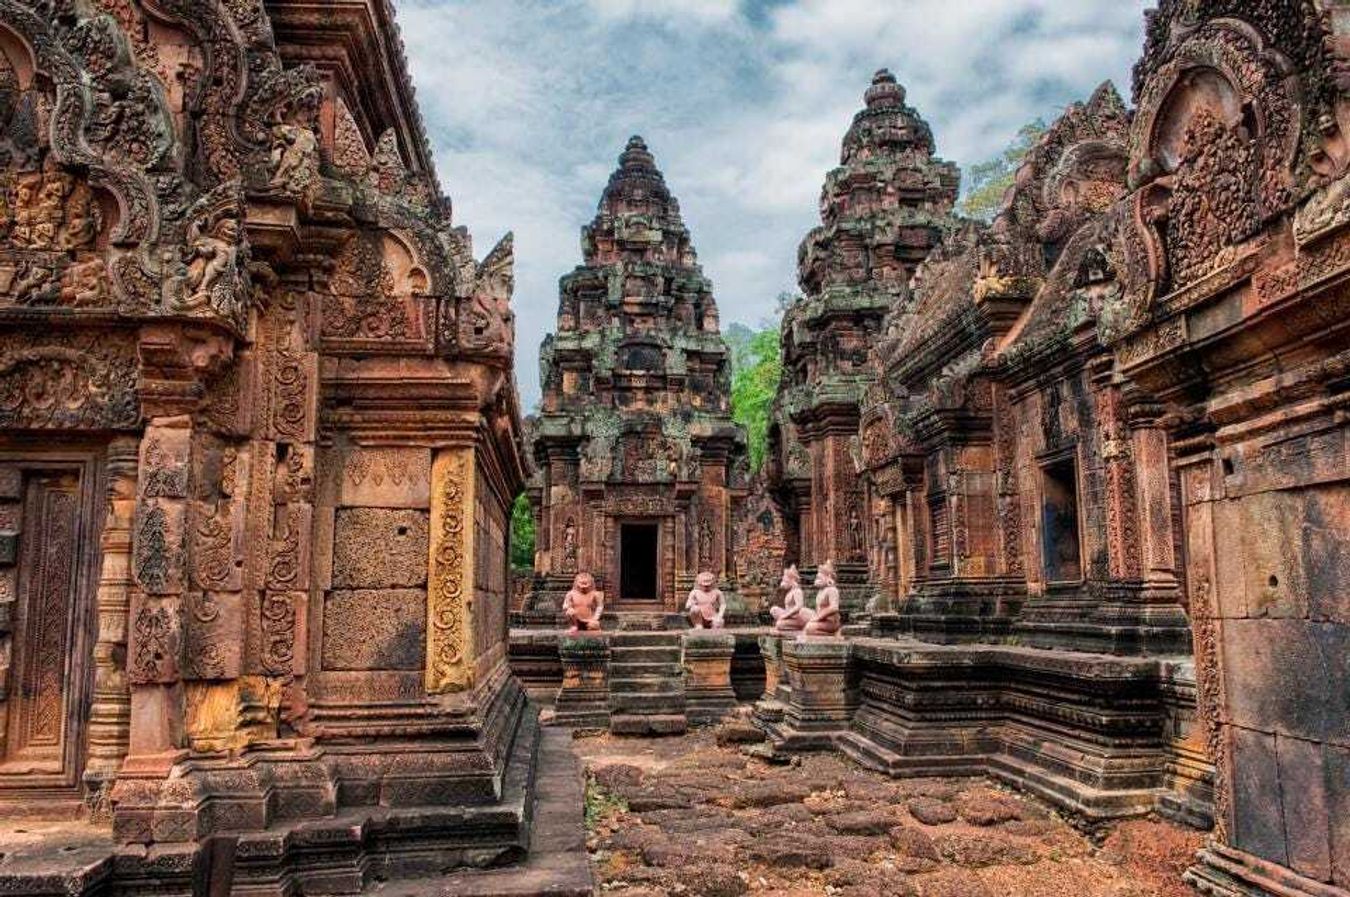 Bucket List Travel Is Back - A New Luxury Way To Visit Angkor Wat